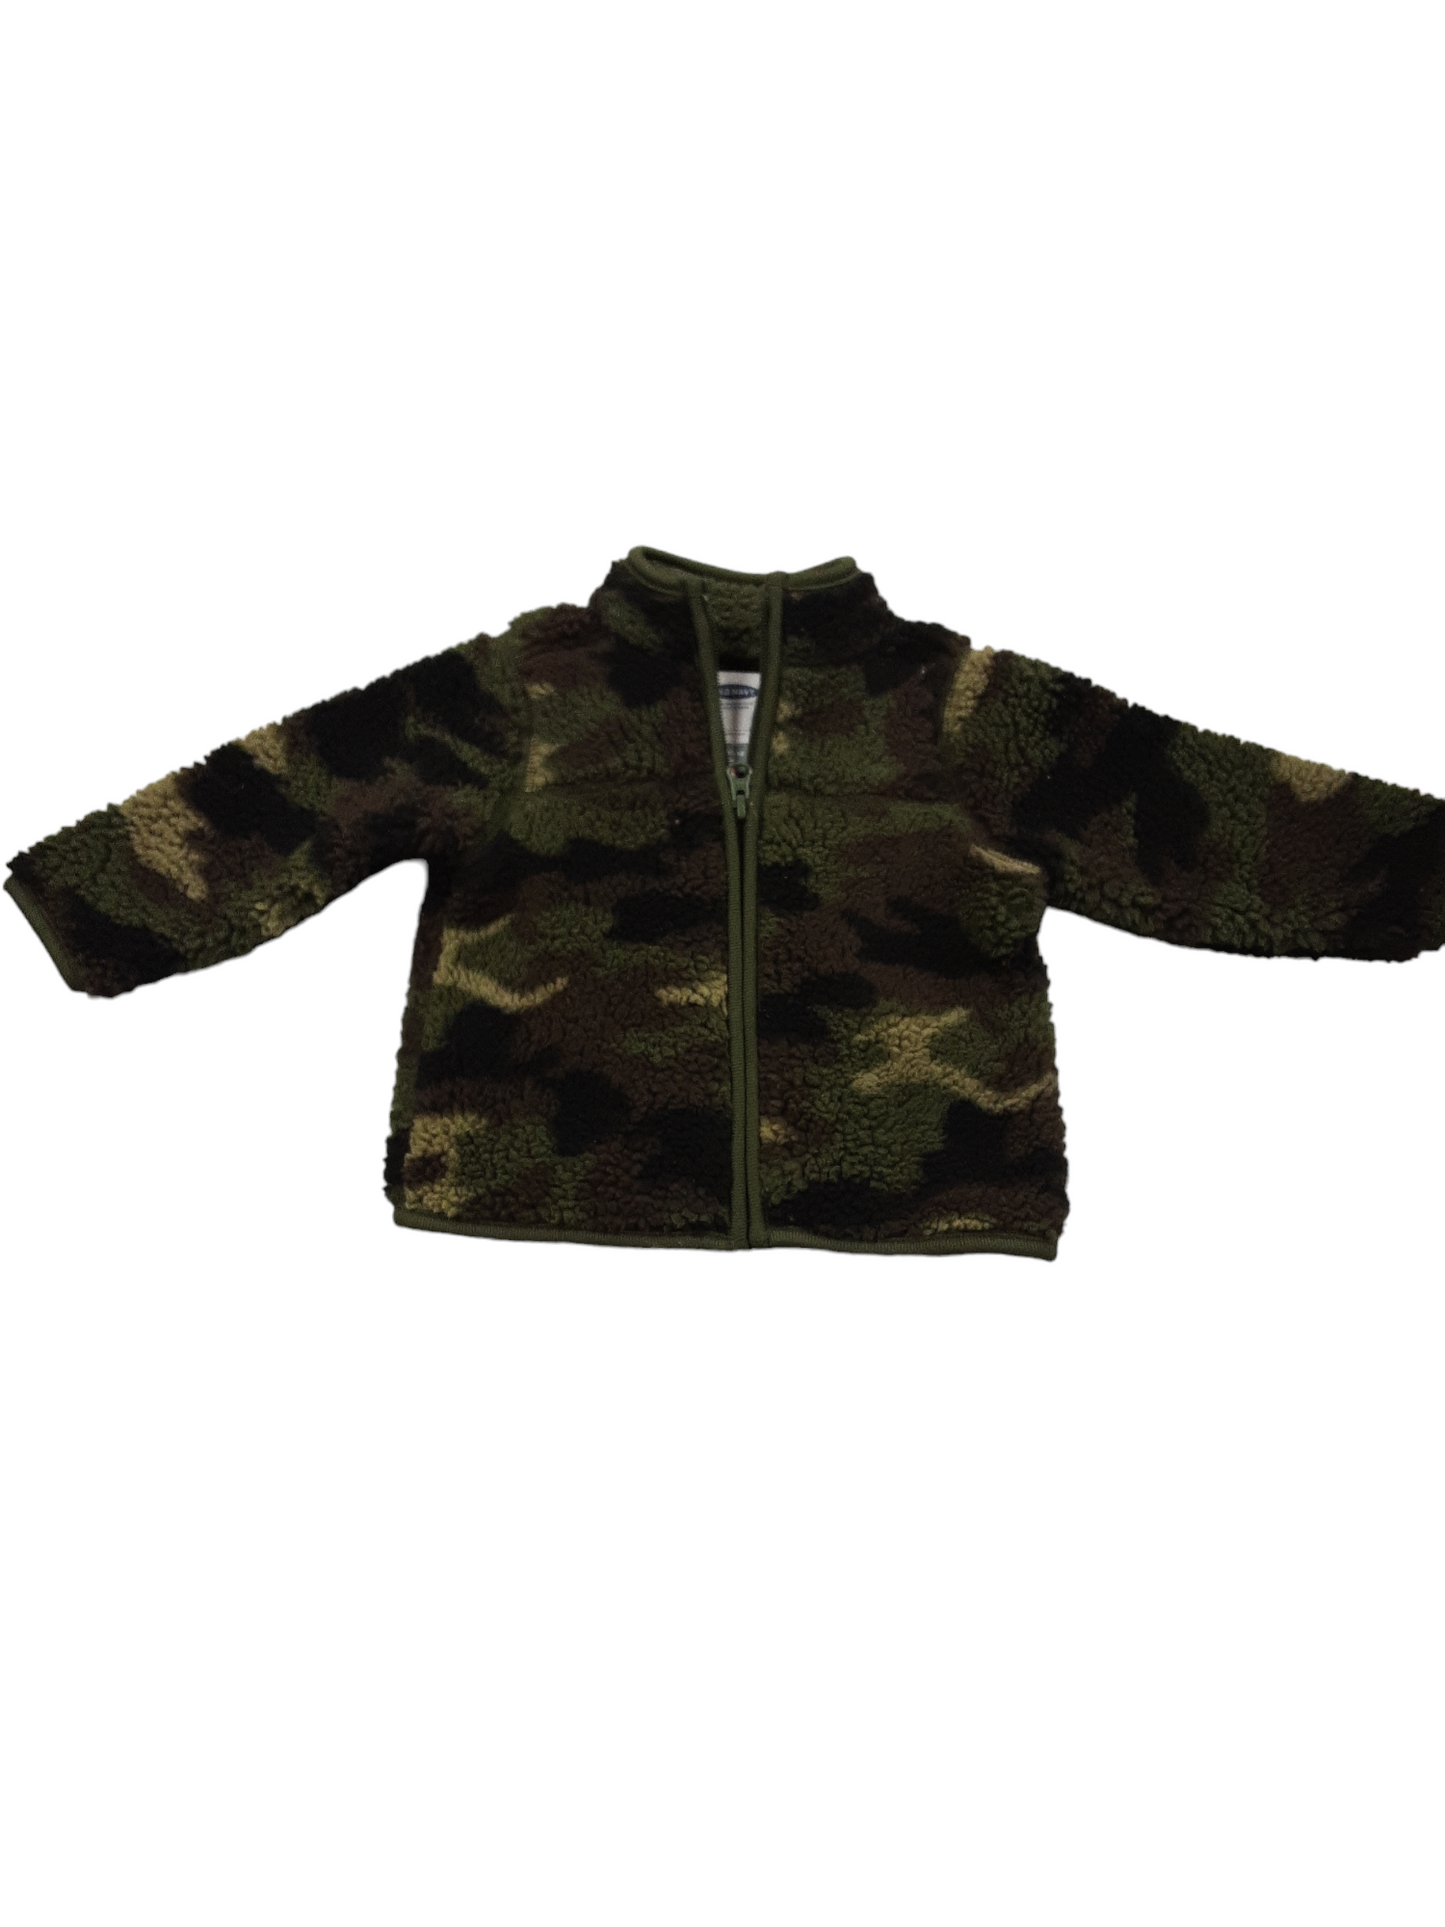 Camouflage sherpa jacket size 6-12months